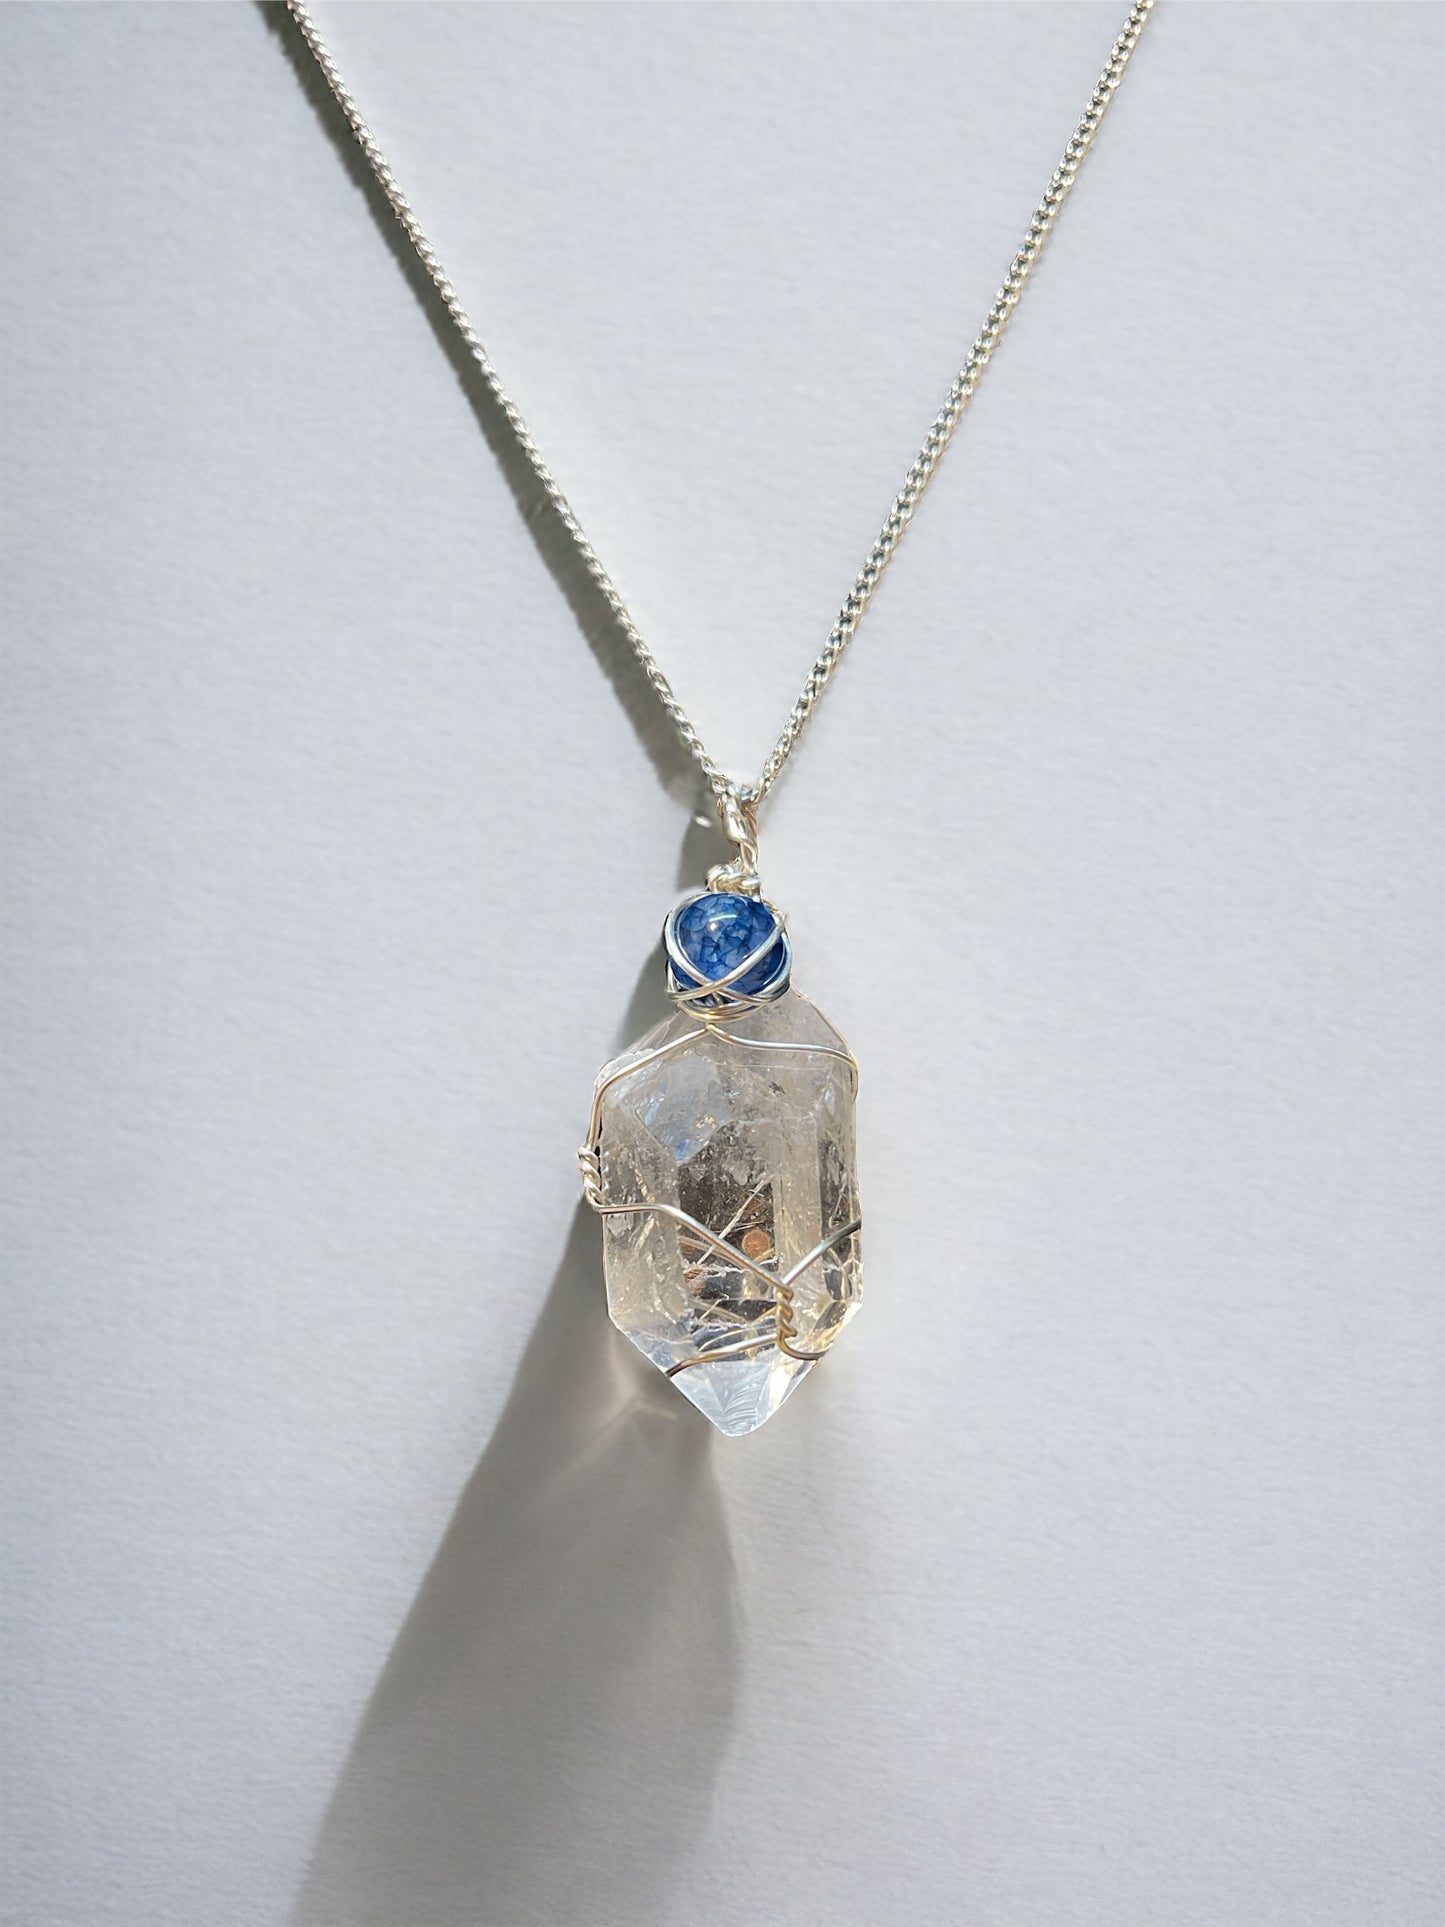 Crystal Quartz with a Blue Lace Agate Bead